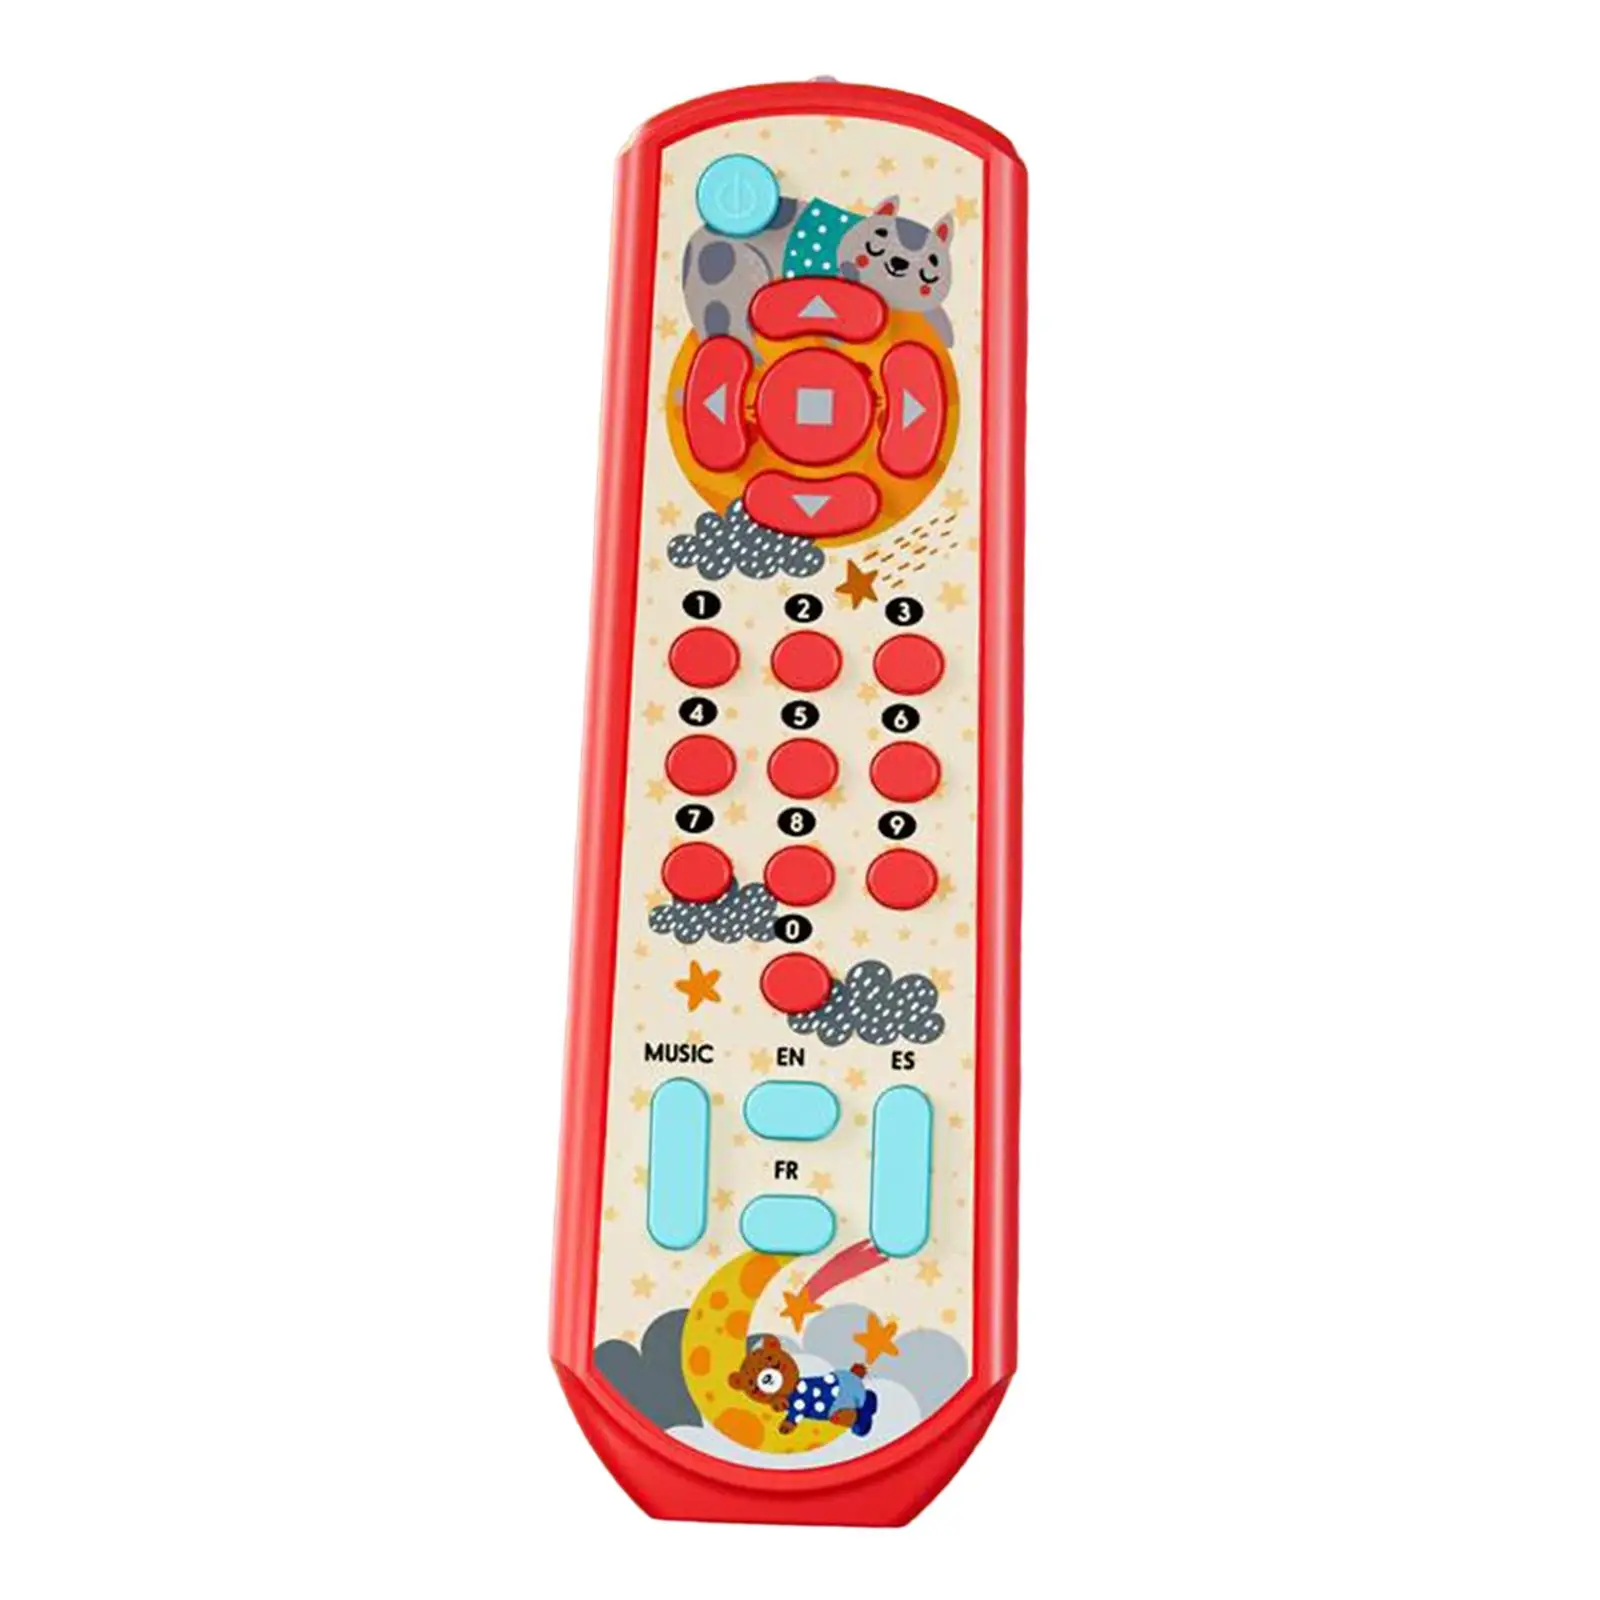 TV Remote Control Toy with Sound Education Toys for Birthday Gifts